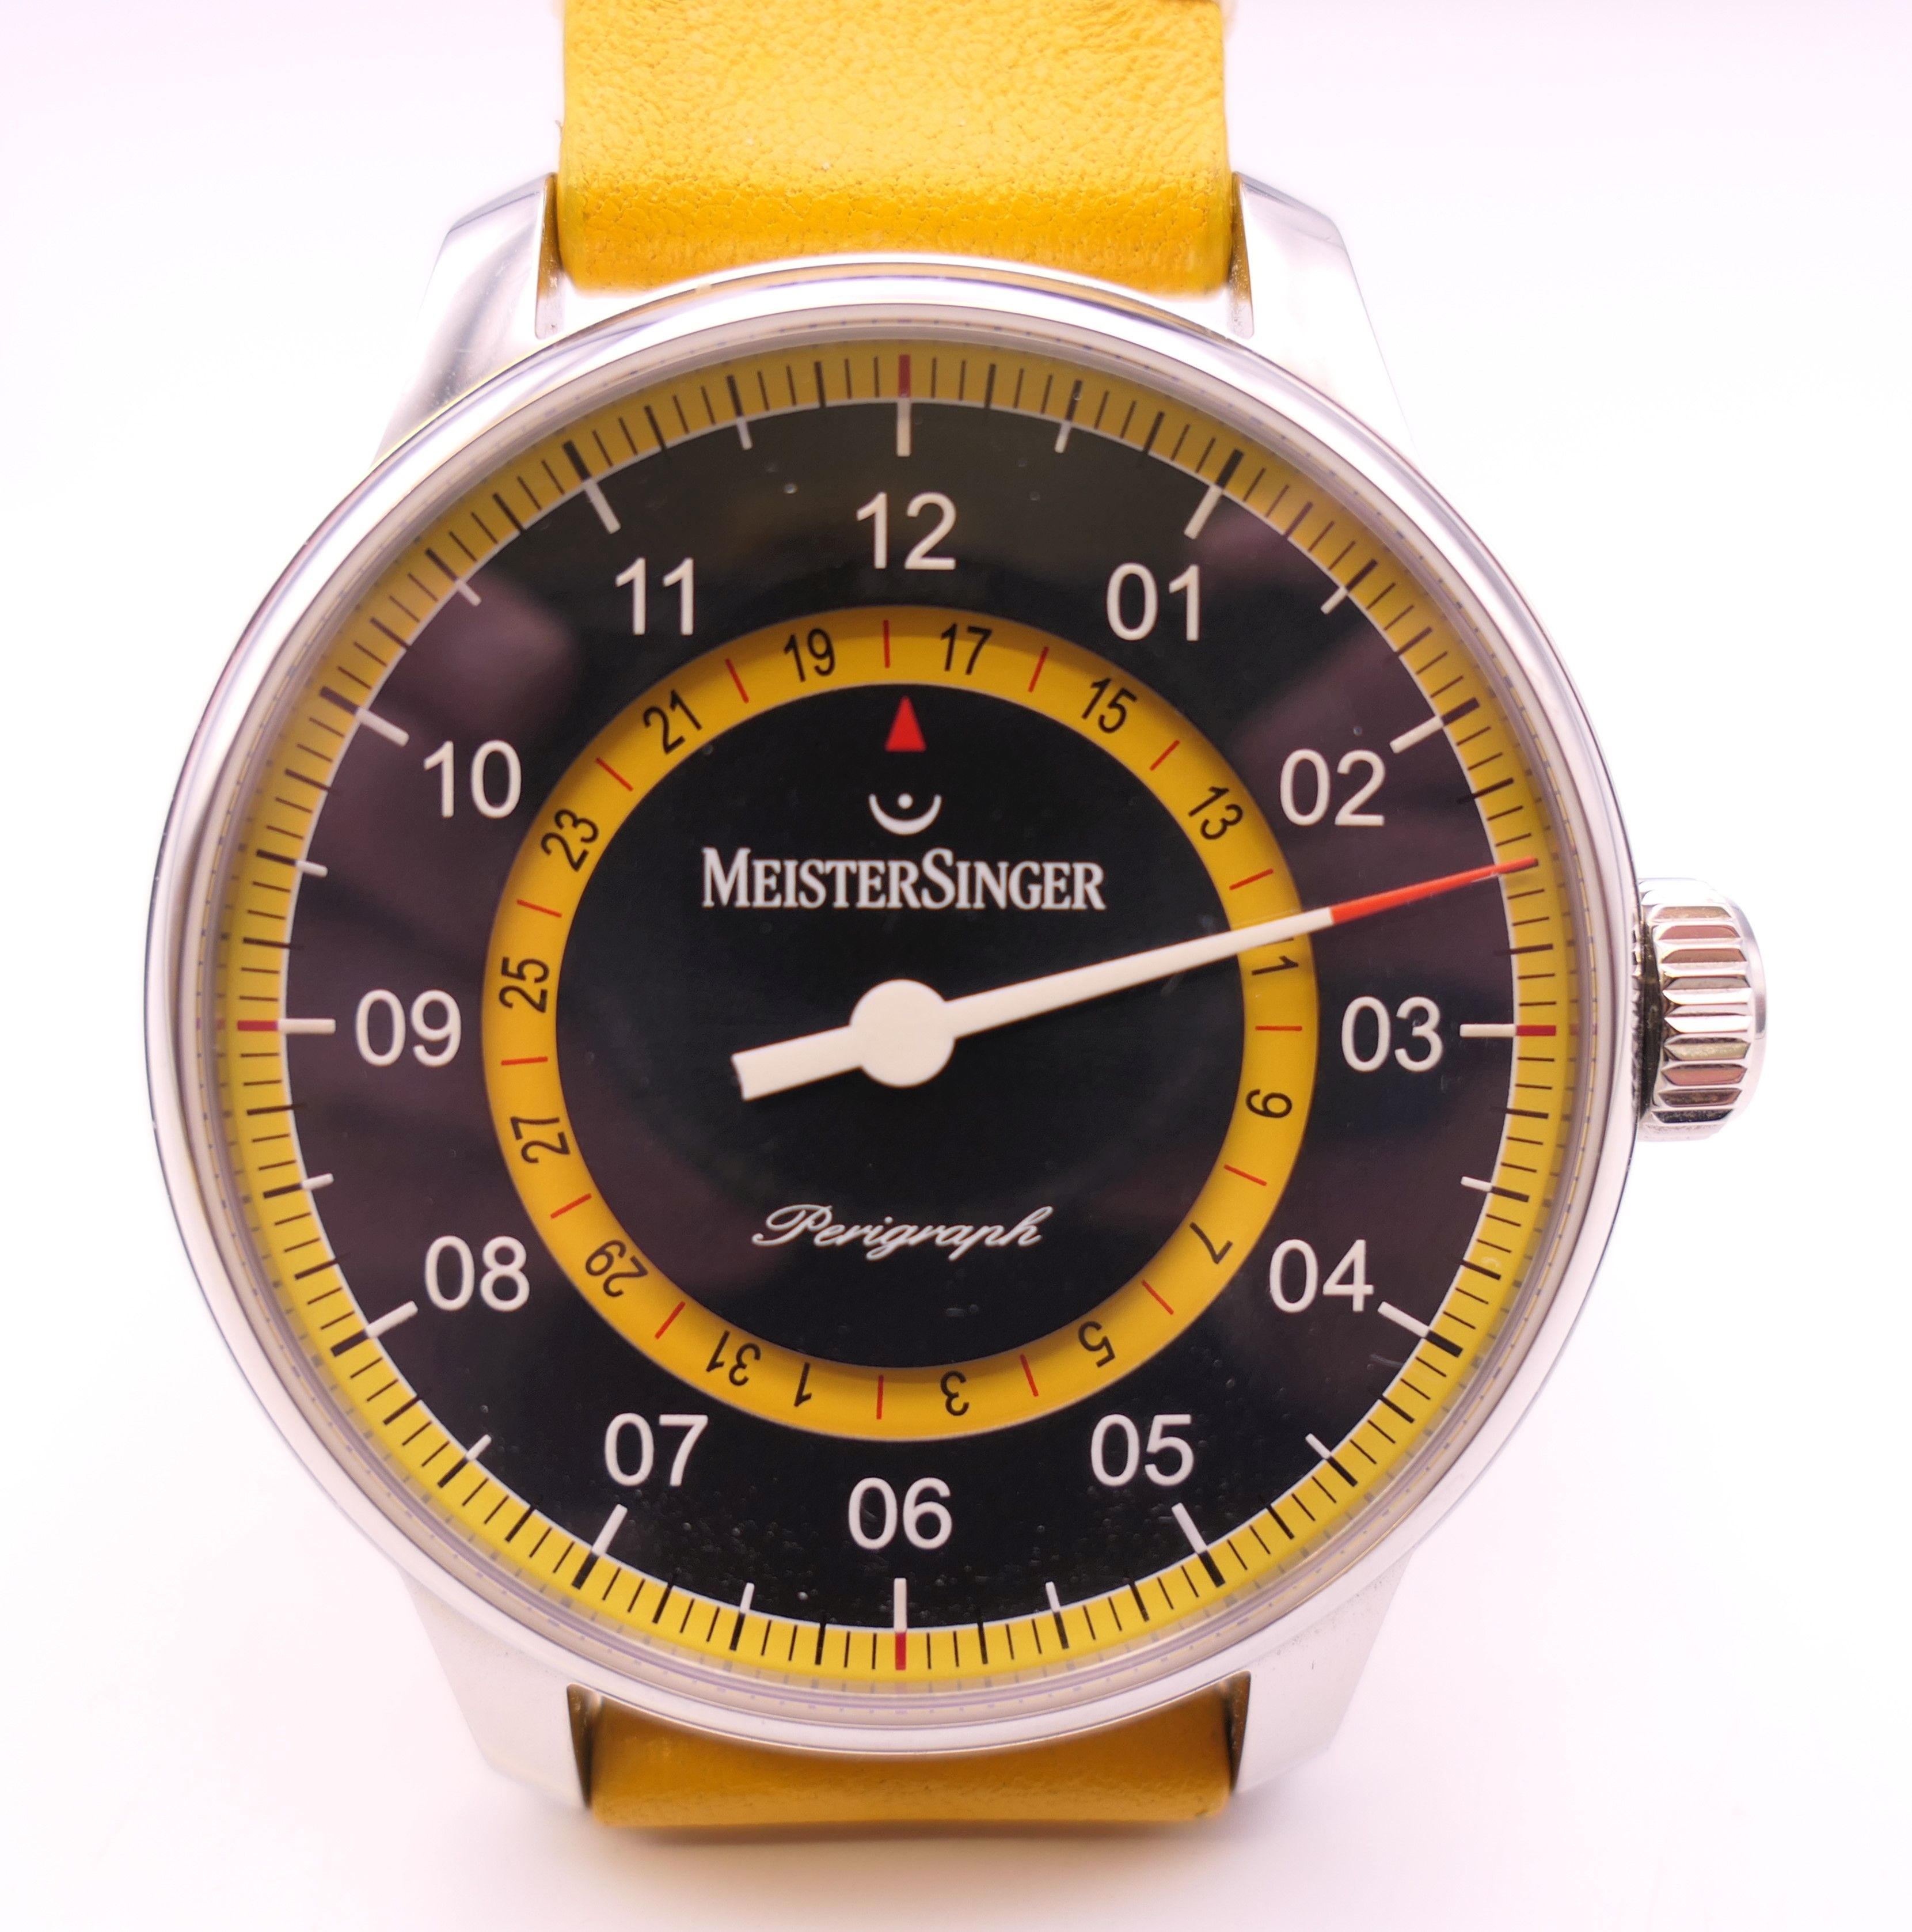 A boxed limited edition Meistersinger Perigraph gentleman's wristwatch. 4.5 cm wide.